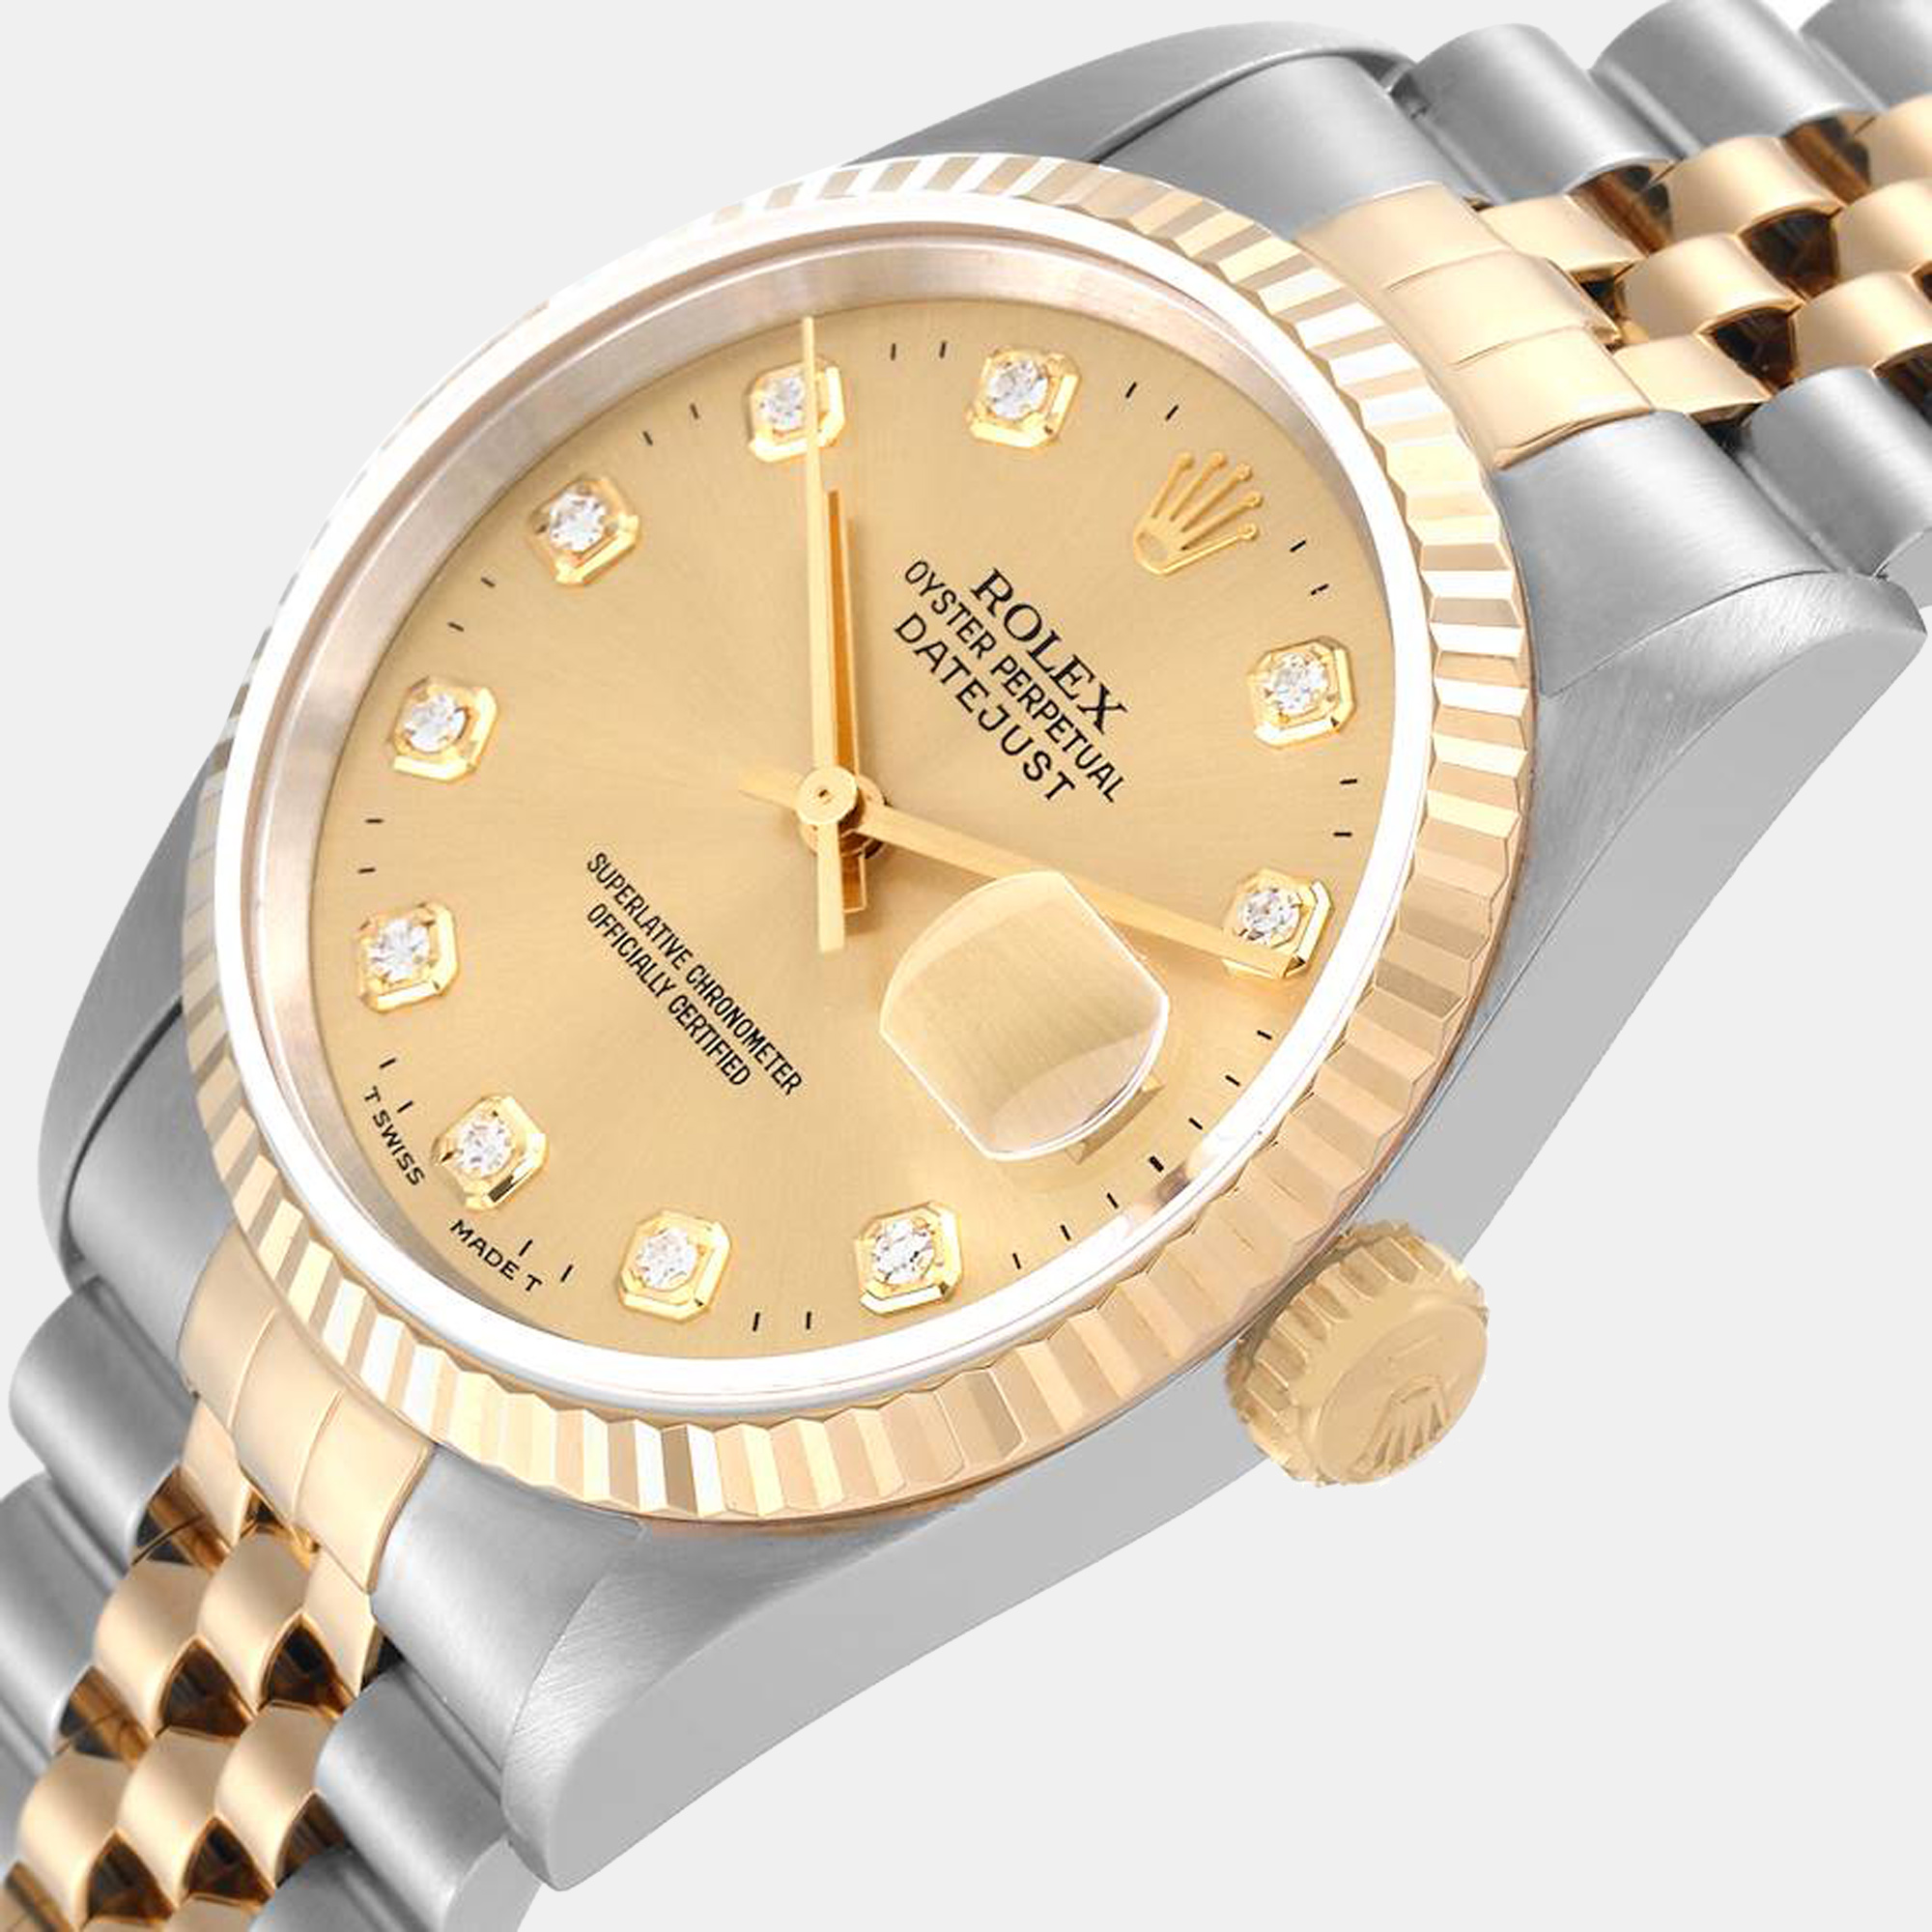 

Rolex Champagne Diamonds 18K Yellow Gold And Stainless Steel Datejust 16233 Men's Wristwatch 36 mm